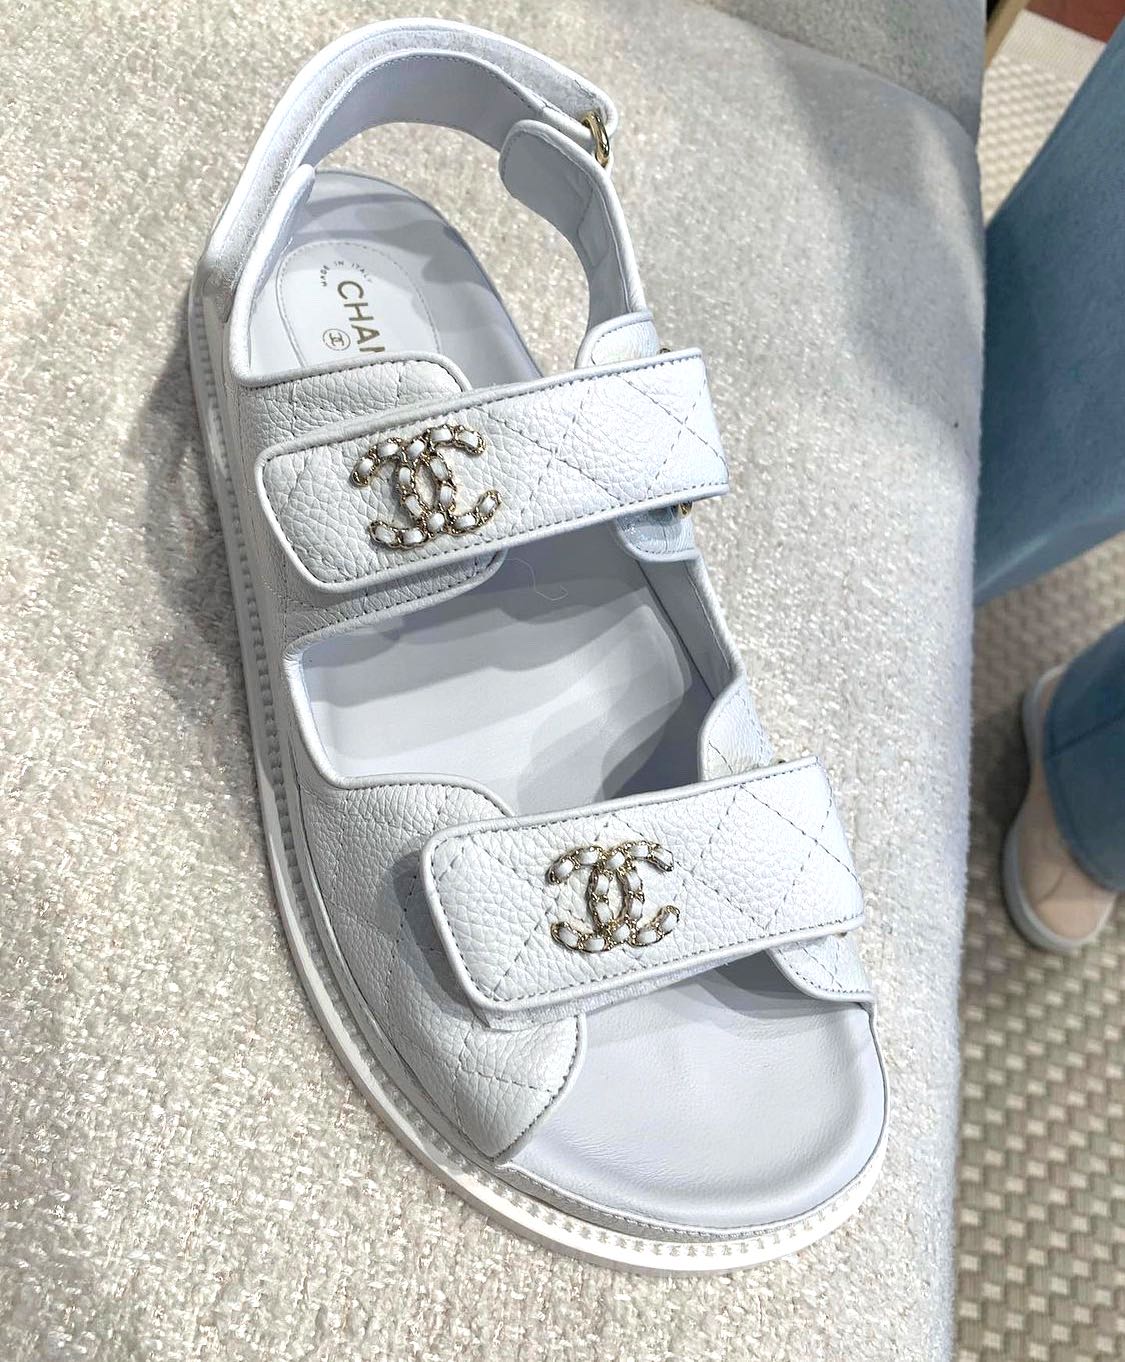 Blake Livelys Chanel Sandals Are A Twist On The Ugly Shoe Trend